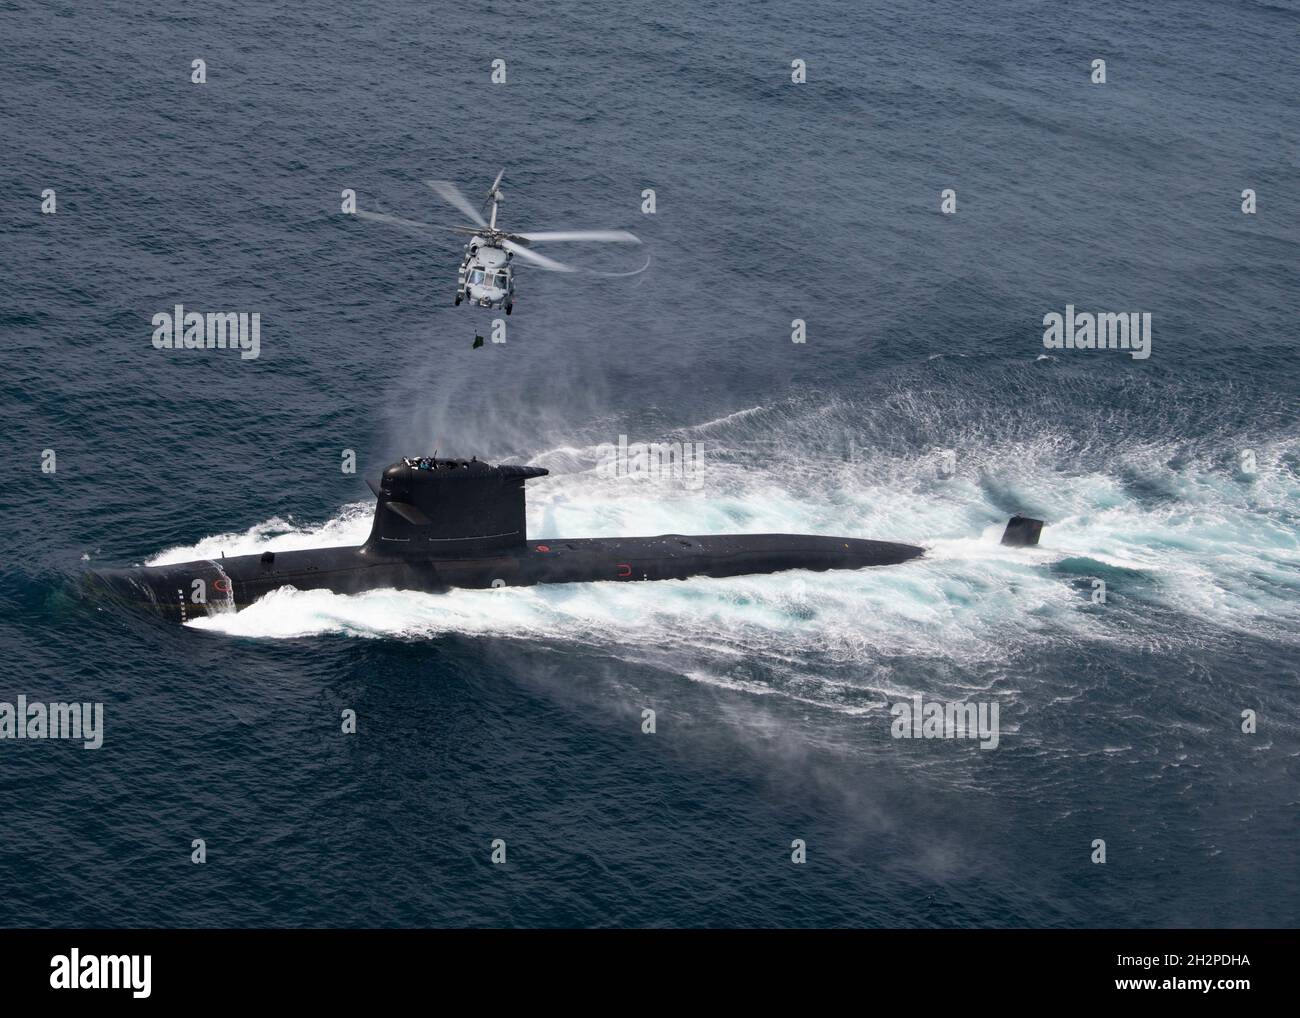 San Diego, United States. 16 August, 2021. A U.S. Navy MH-60R Seahawk helicopter lowers a bag by hoist to the Chilean Navy Scorpene Class Submarine CS Carrera during Diesel-Electric Submarine multi-national Initiative Hoist Exercise 2021 August 16, 2021 near San Diego, California.  Credit: MC2 Chelsea Meiller/U.S. Navy/Alamy Live News Stock Photo